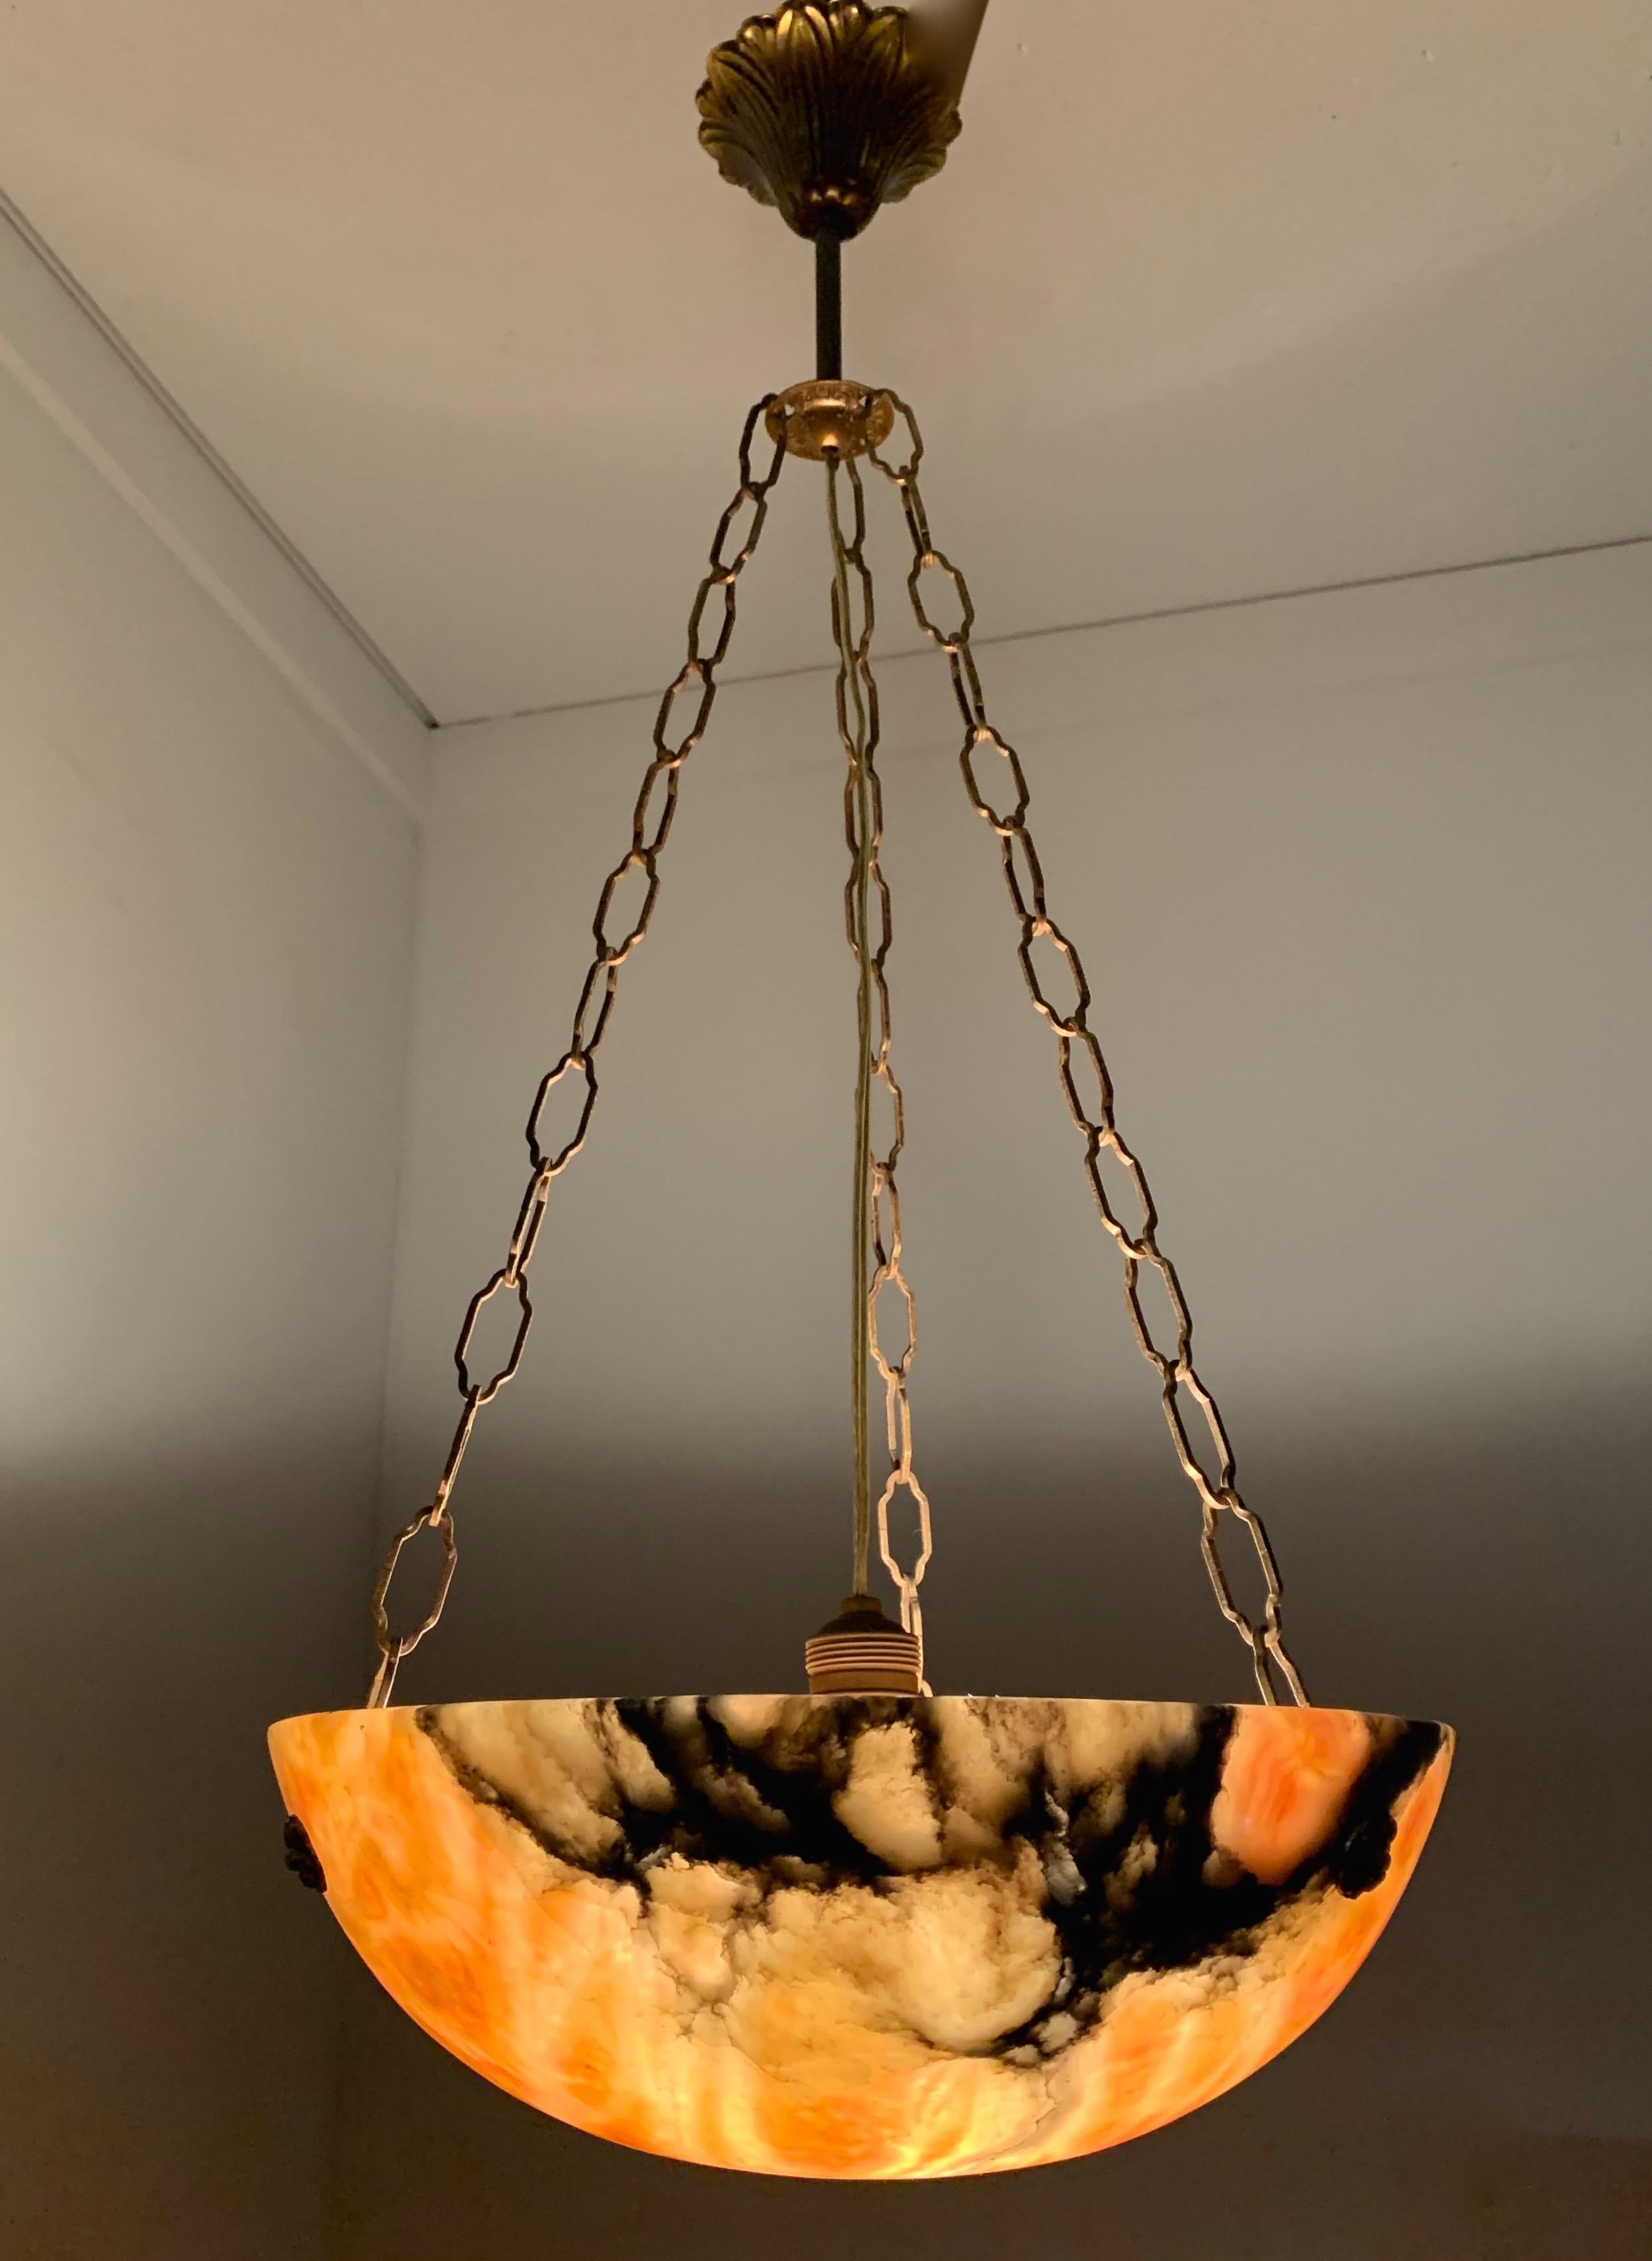 Beautiful 1920s, Art Deco 'burning lava' pendant.

This Art Deco pendant comes with brass chains and canopy and this great combination is a real joy to look at. The perfect circular shape of this pendant, the color and, most of all, the stunning